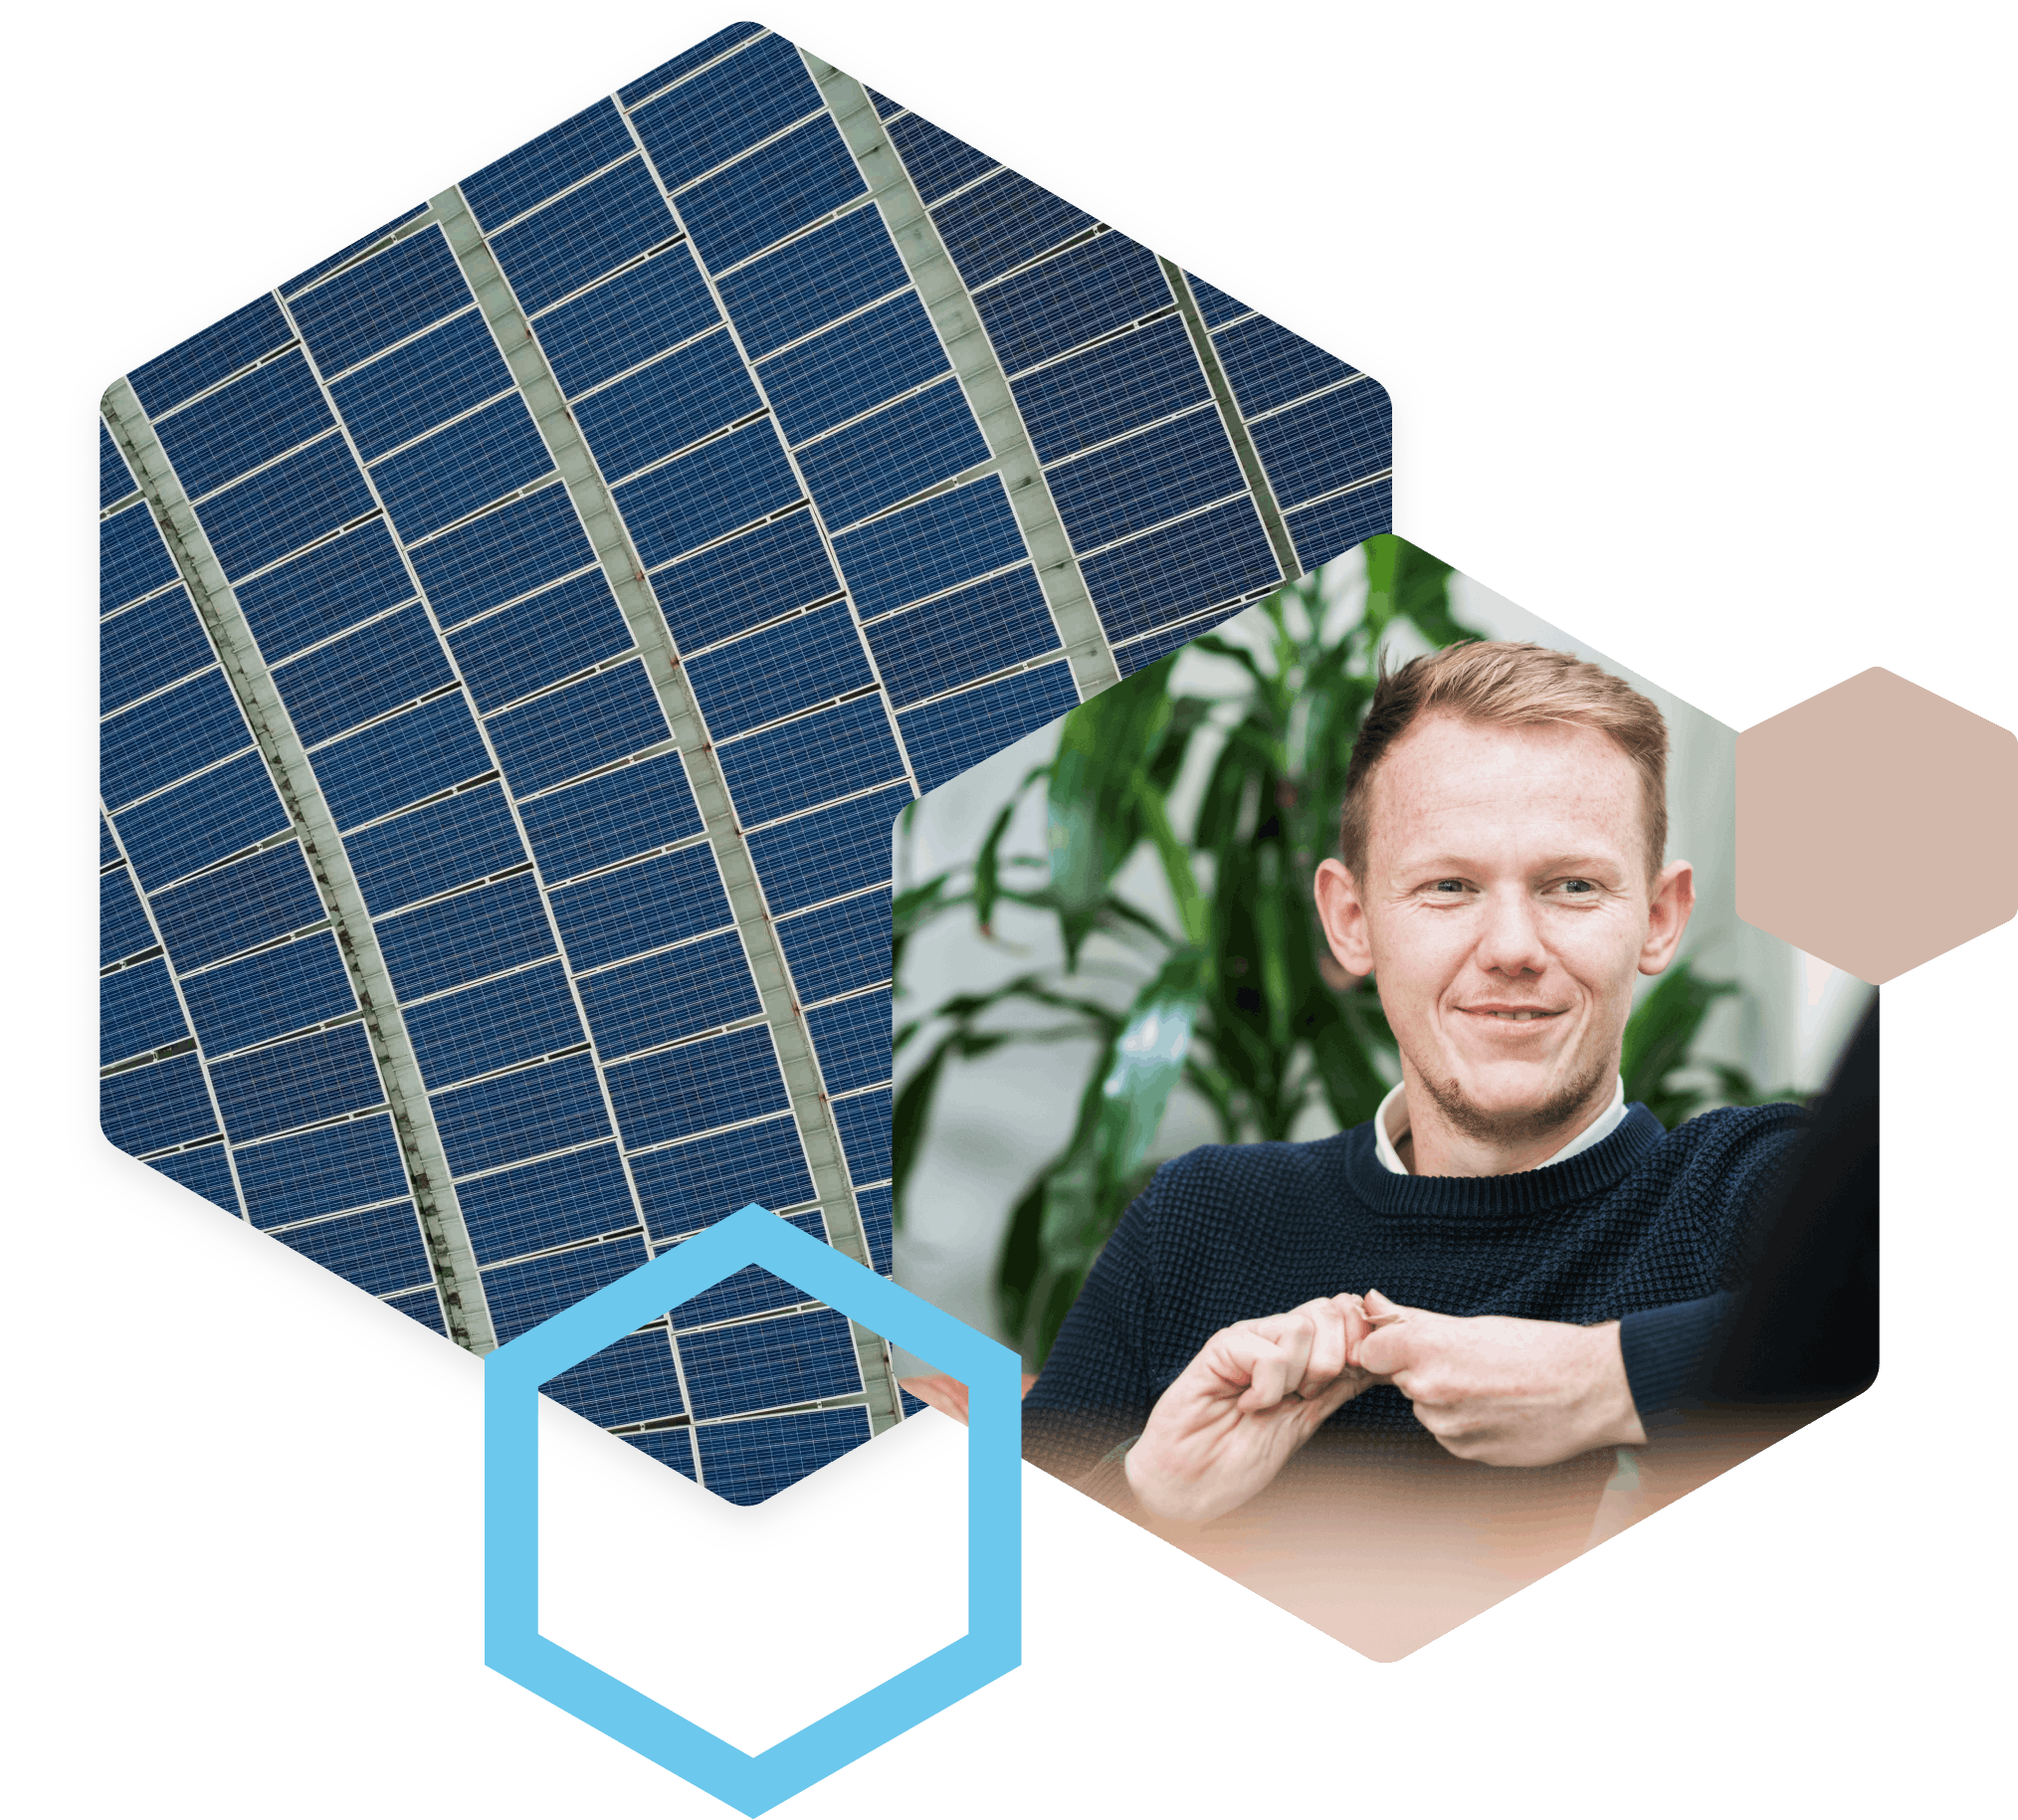 Solar panels and man smiling